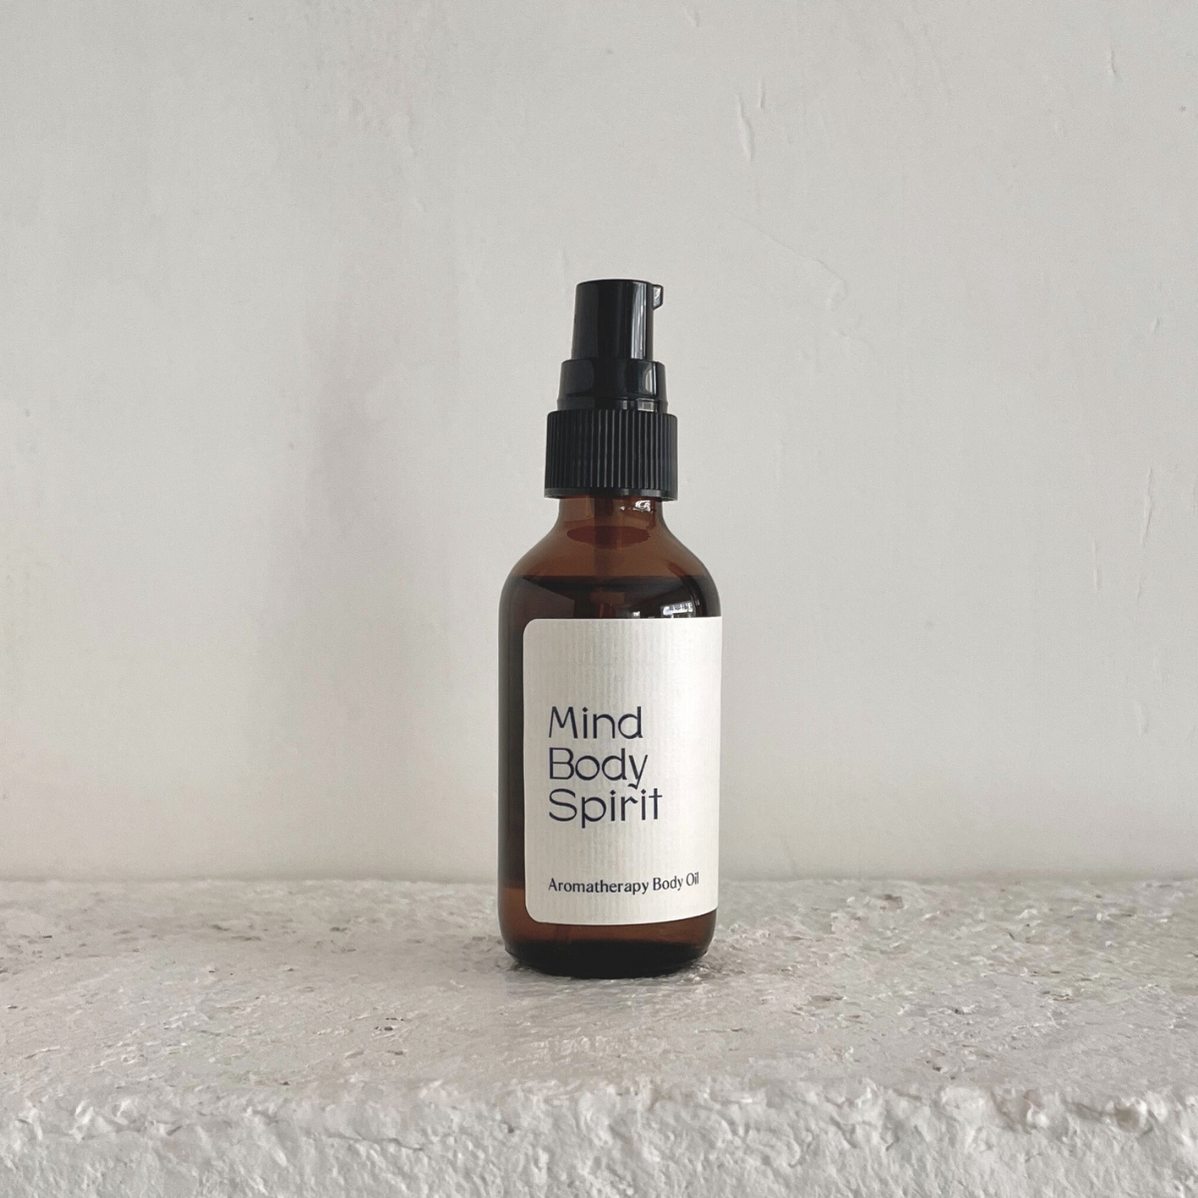 species by the thousands / Mind Body Spirit body oil's sense of center originates from an integrative blend of palo santo, frankincense, patchouli, lavender and clary sage scent. Can help promote a healthy sense of balance and transform the moment into something sacred and holistic. 